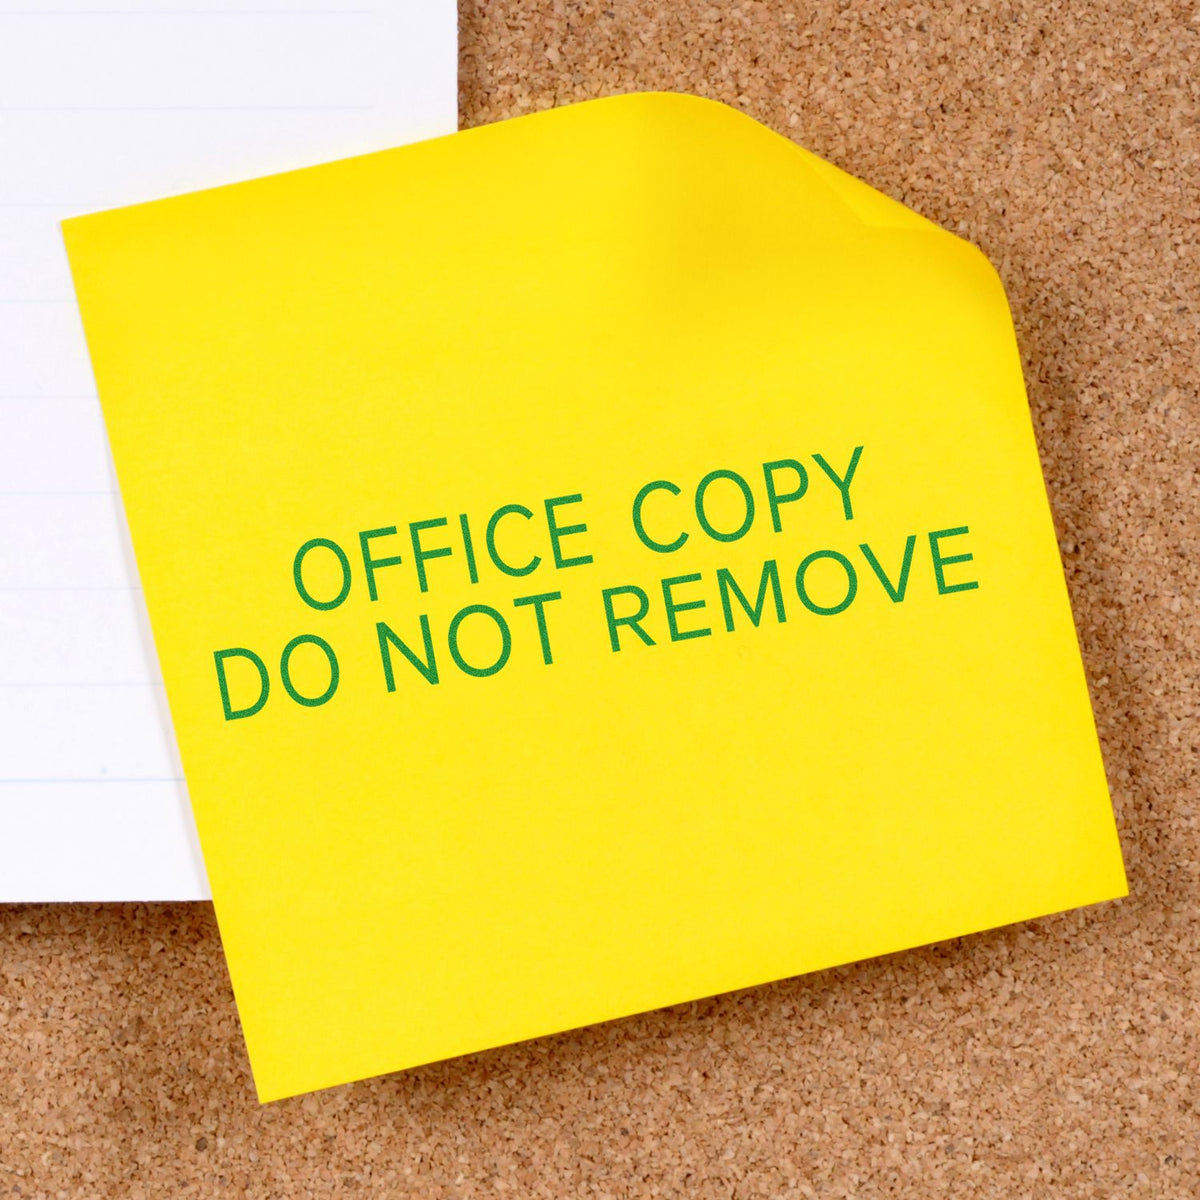 Large Narrow Font Office Copy Do Not Remove Rubber Stamp In Use